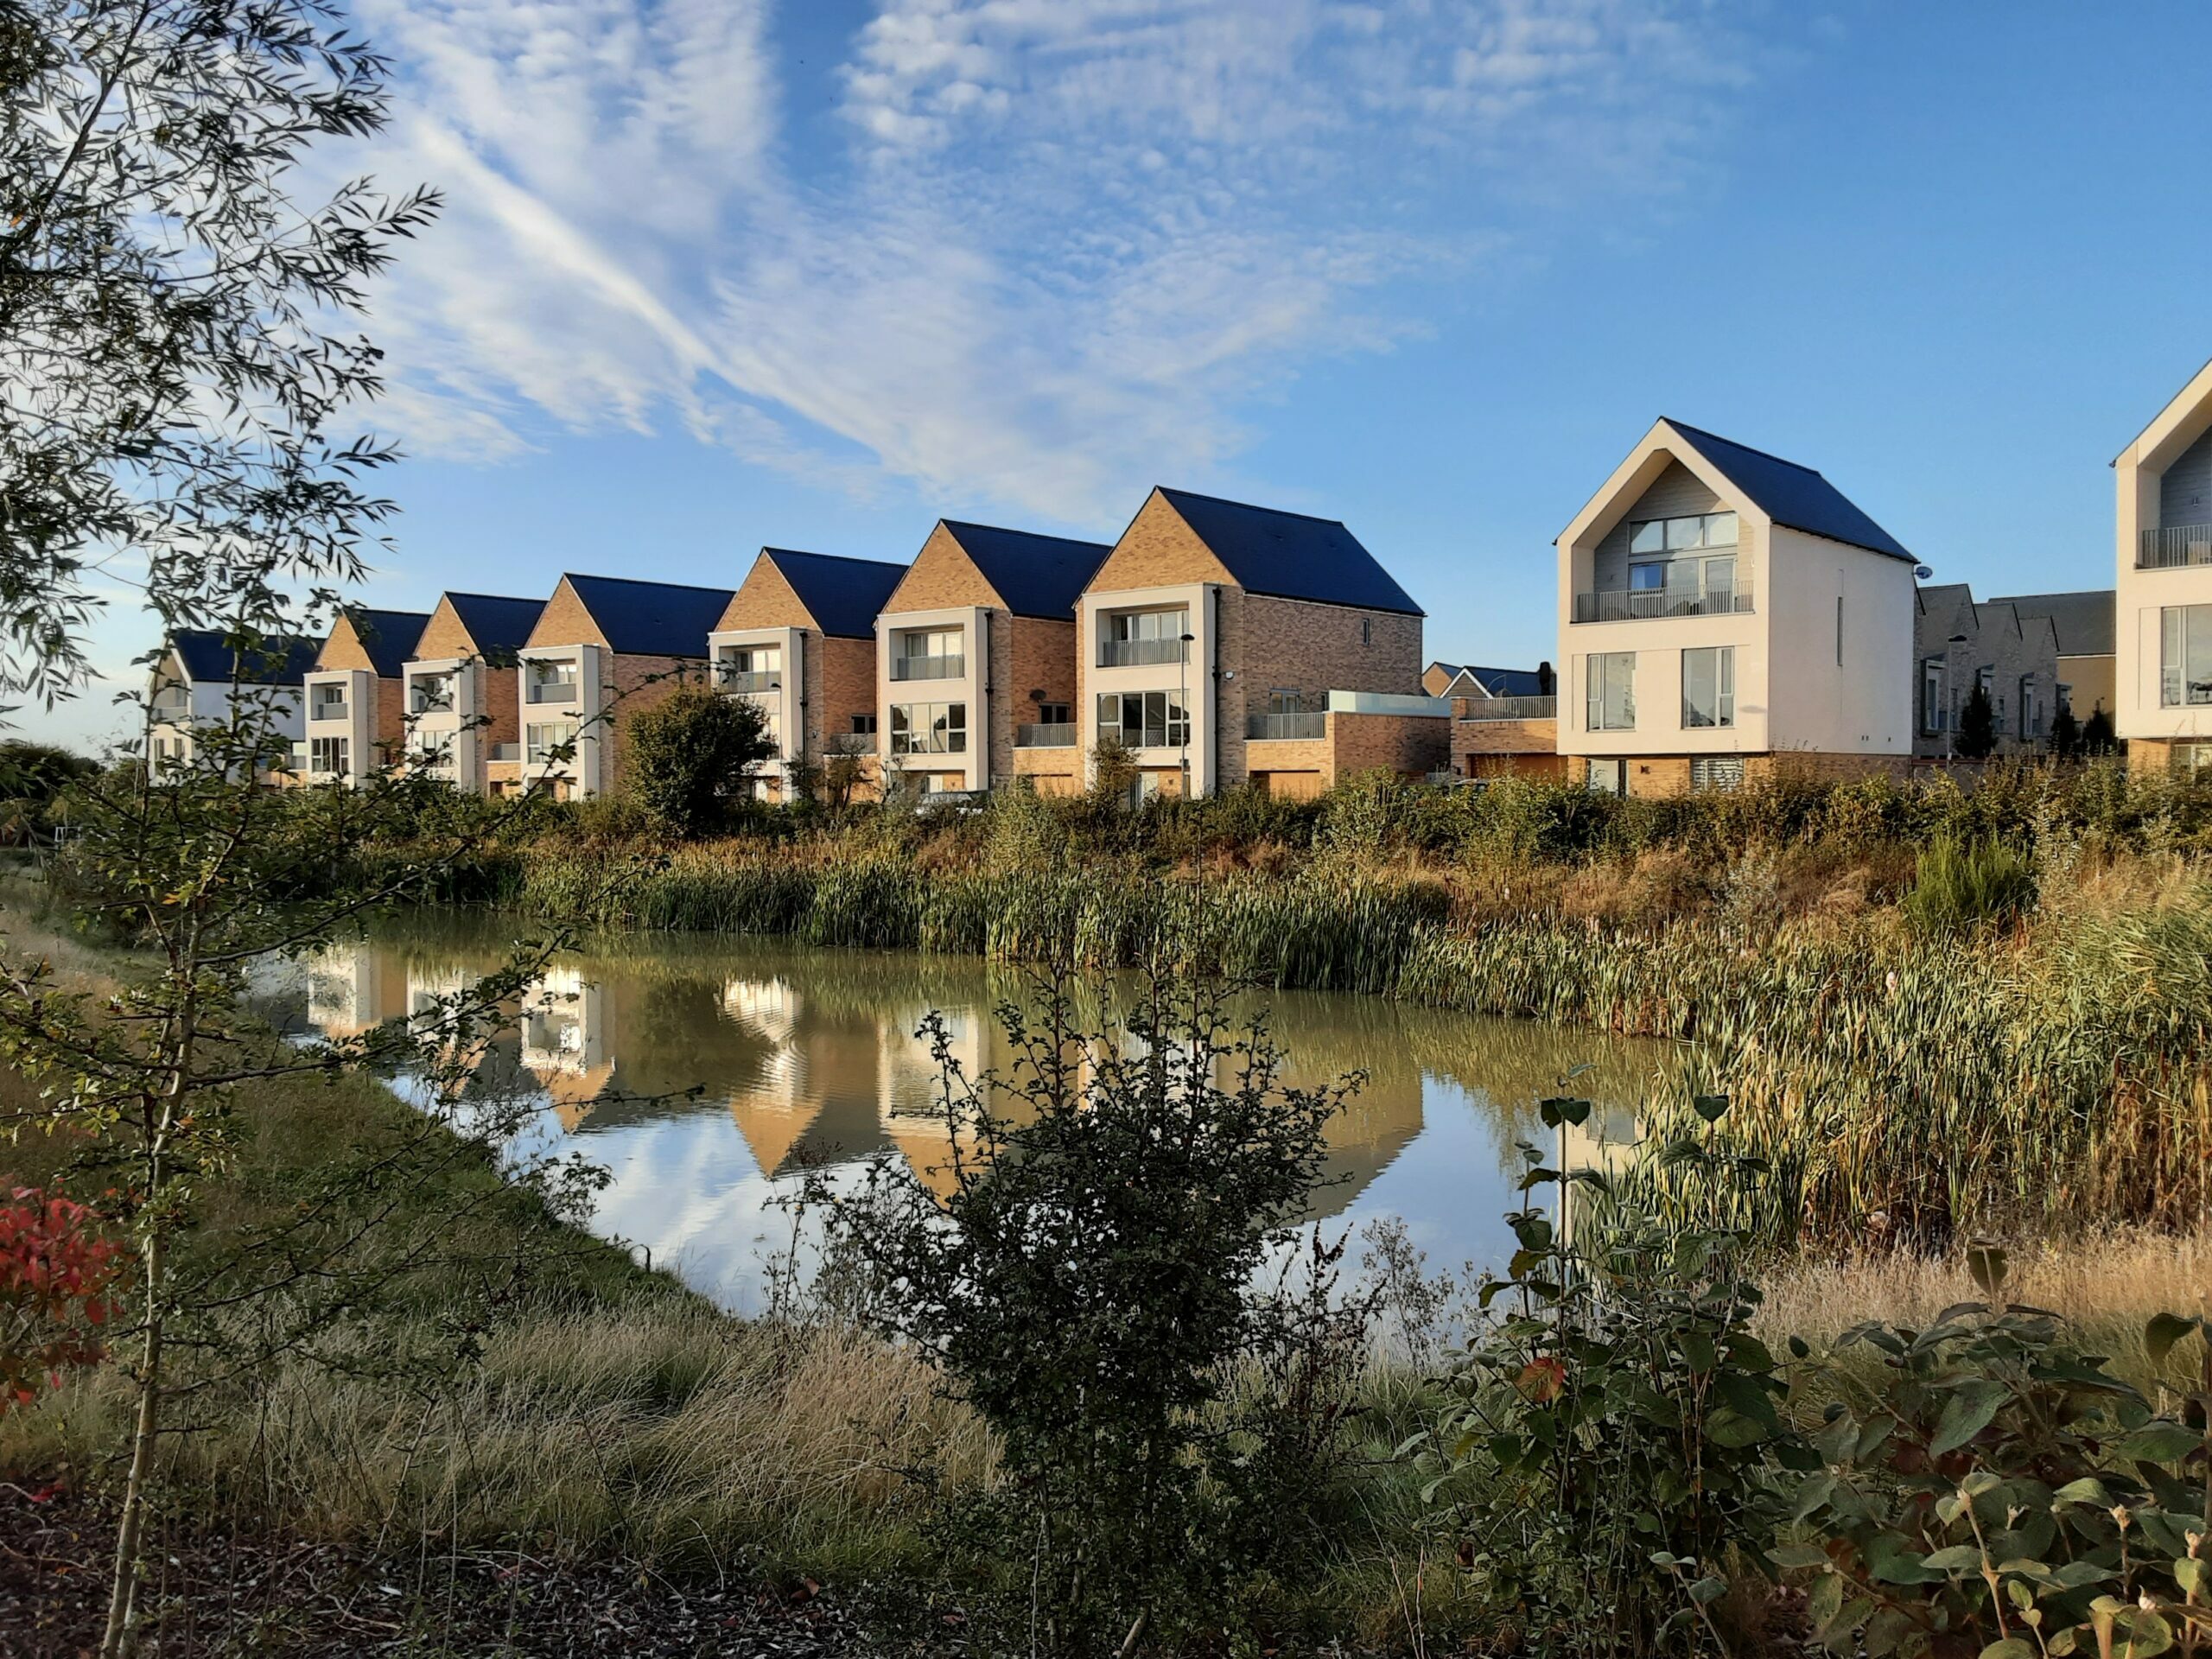 A photo of new, modern-looking homes, looking out over a river. Blue skies in the background